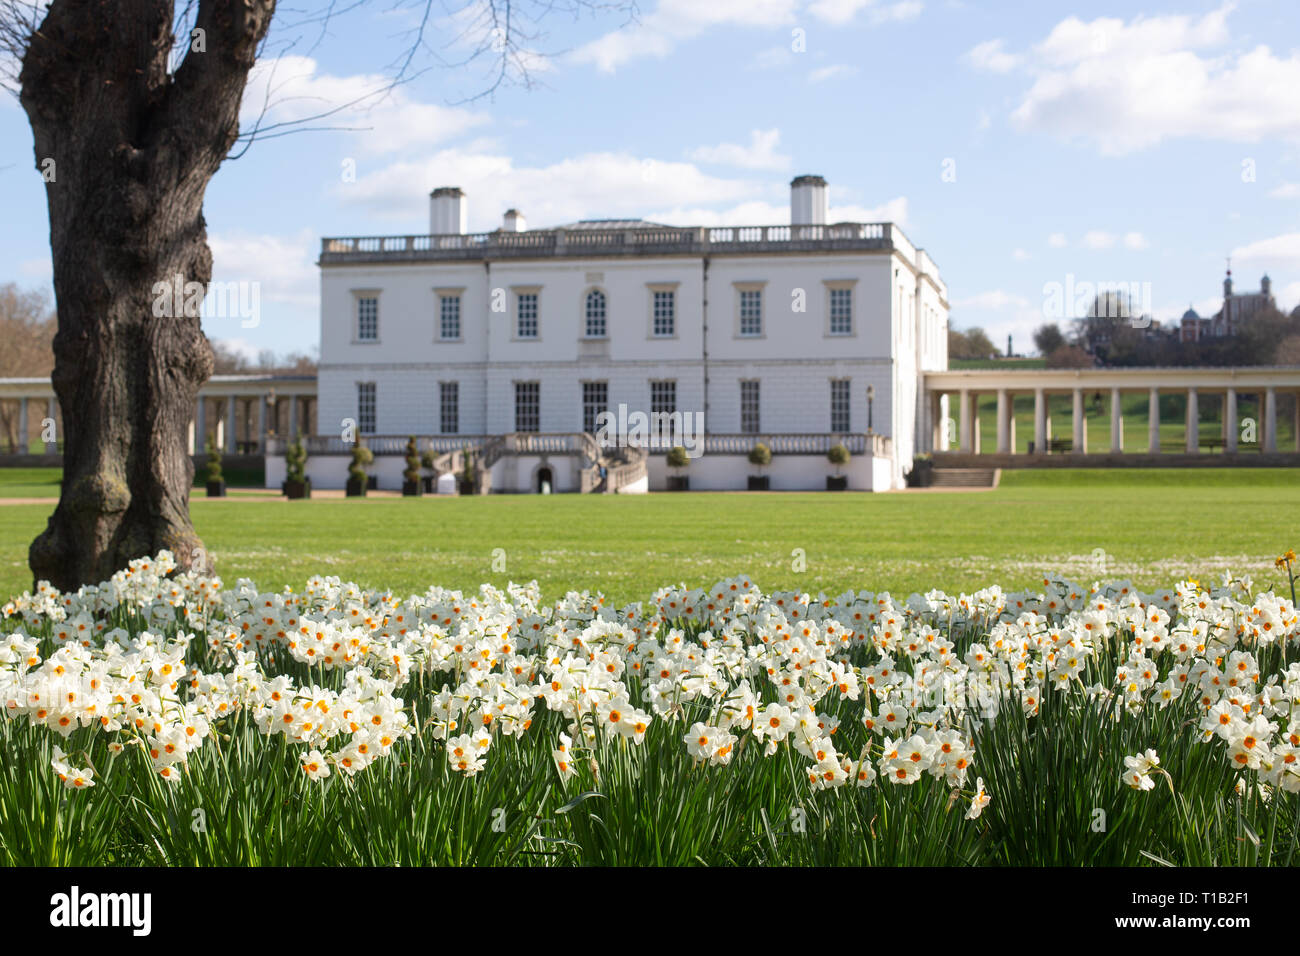 London, UK. 25th March, 2019. White and orange daffodils pictured in sunshine in front of the historic Queen's House in Greenwich. Credit: Rob Powell/Alamy Live News Stock Photo